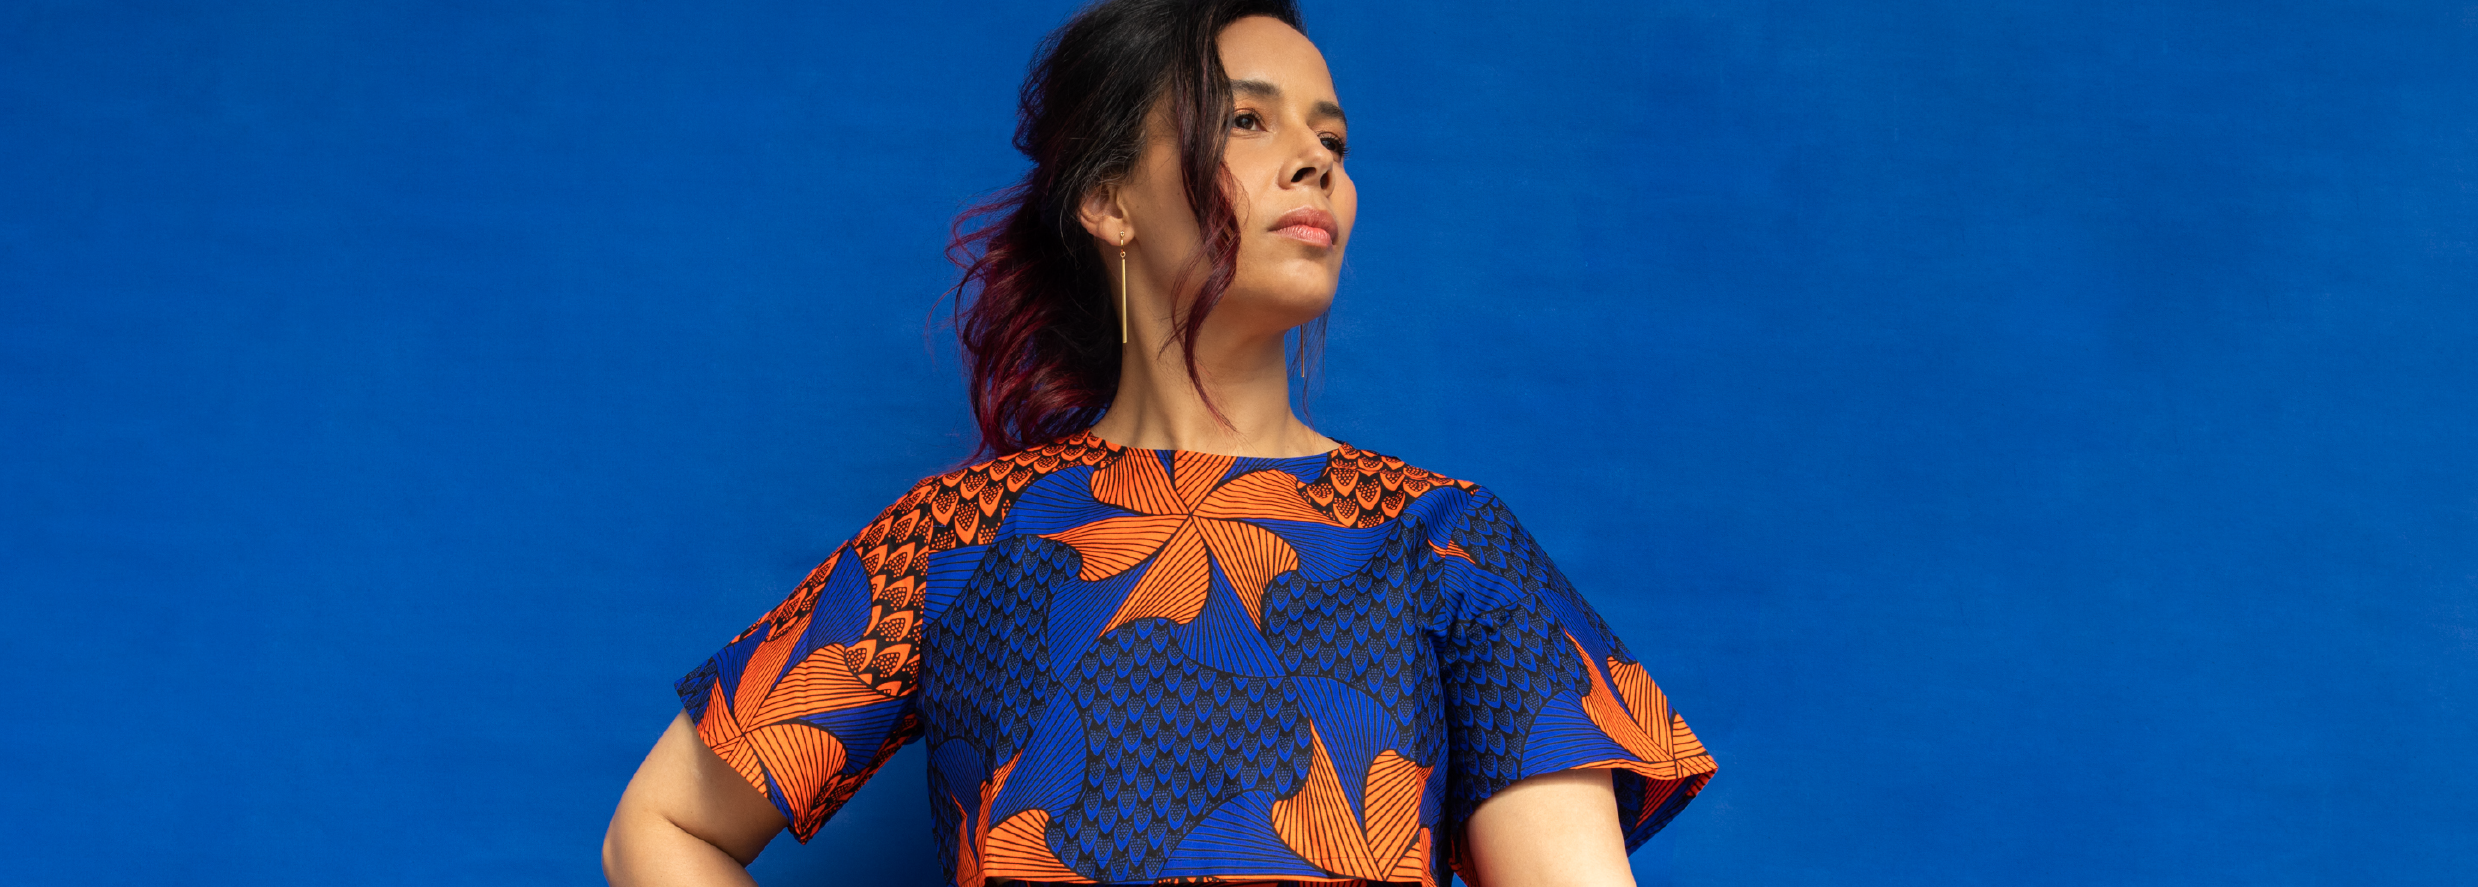 Rhiannon Giddens stands looking over her left shoulder wearing a colorful blue and orange dress.